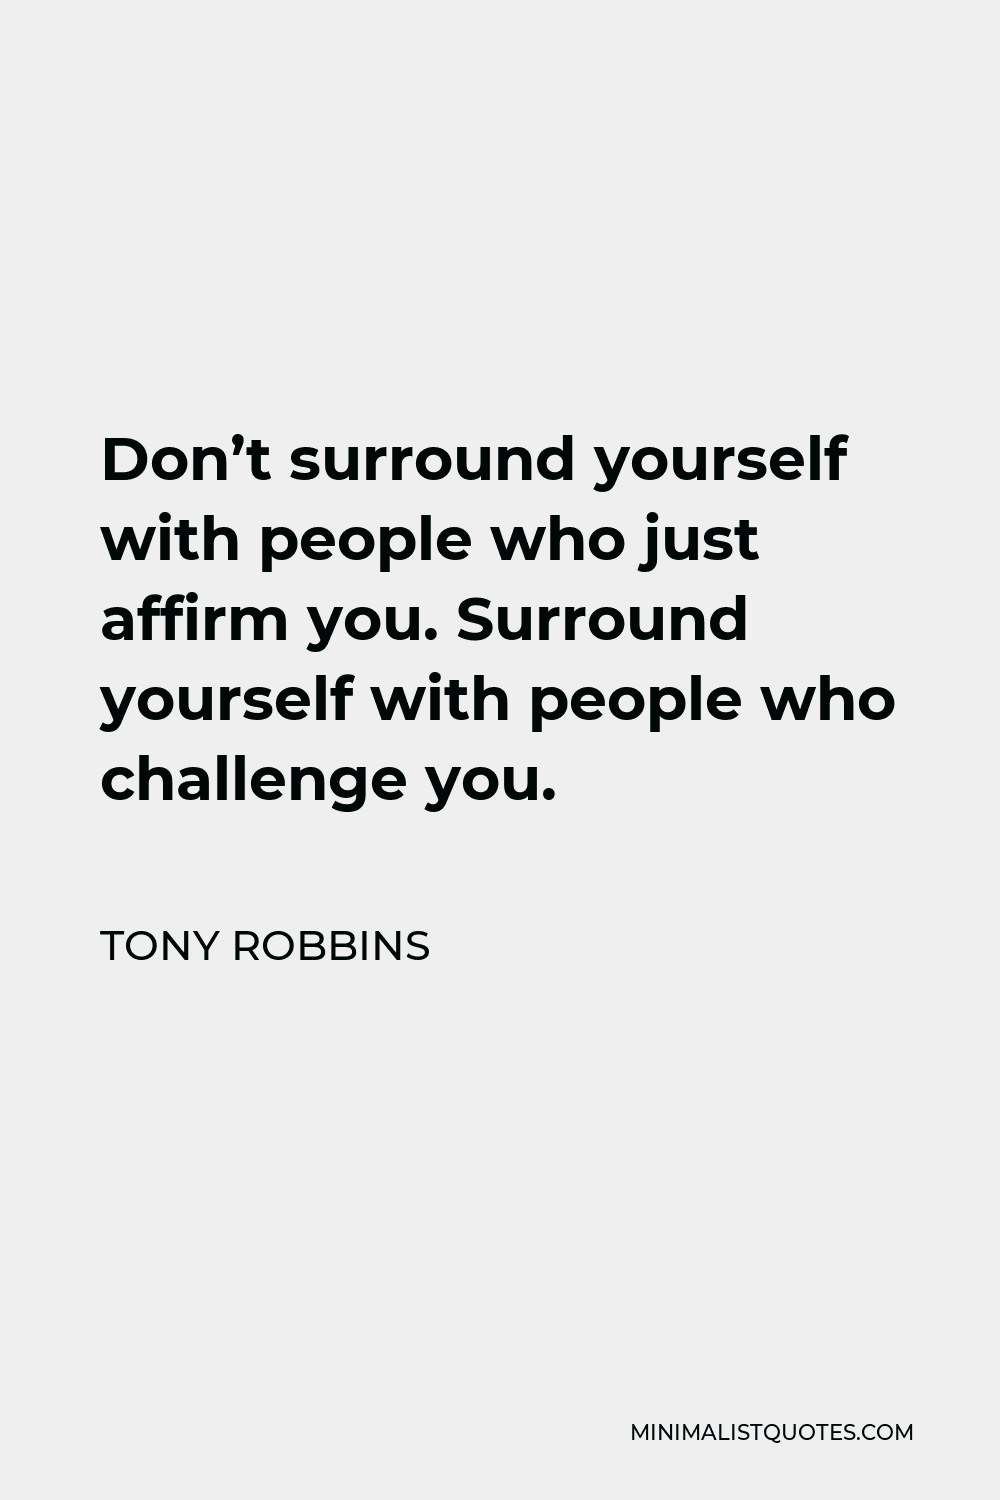 Tony Robbins Quote - Don’t surround yourself with people who just affirm you. Surround yourself with people who challenge you.